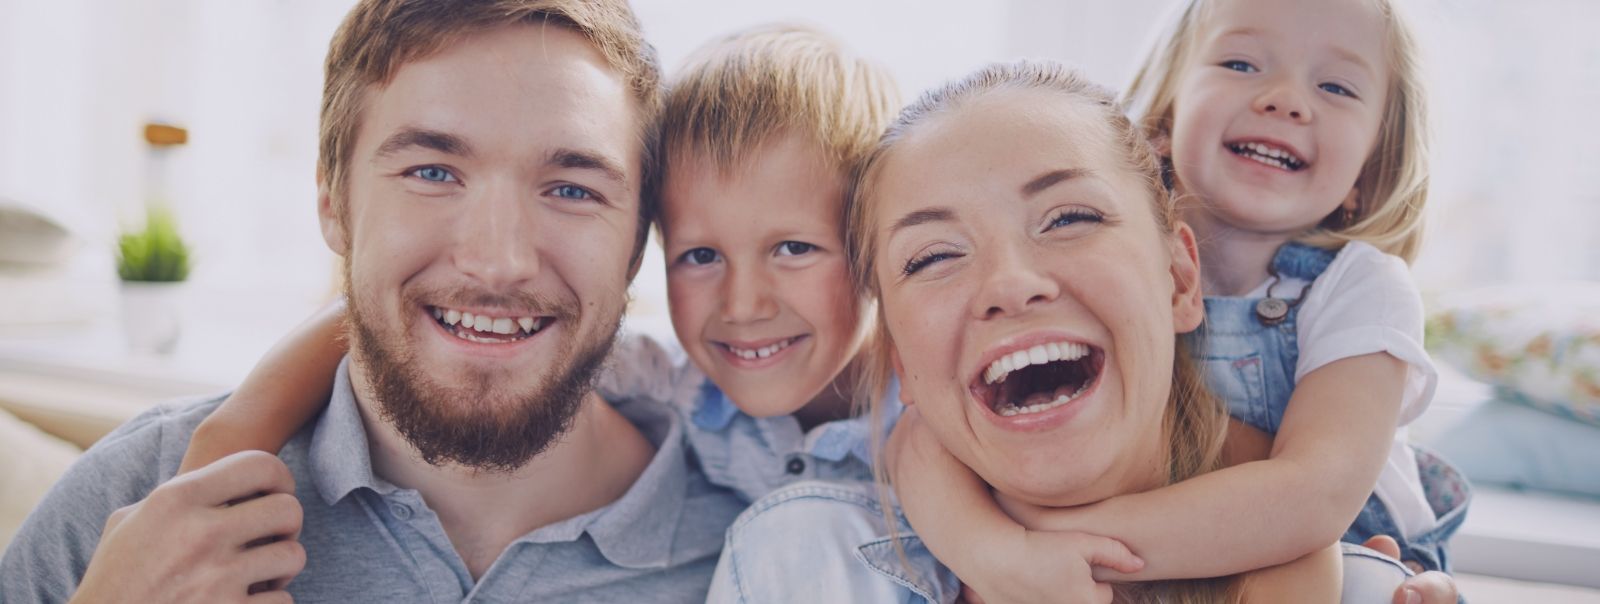 Family of four smiling together